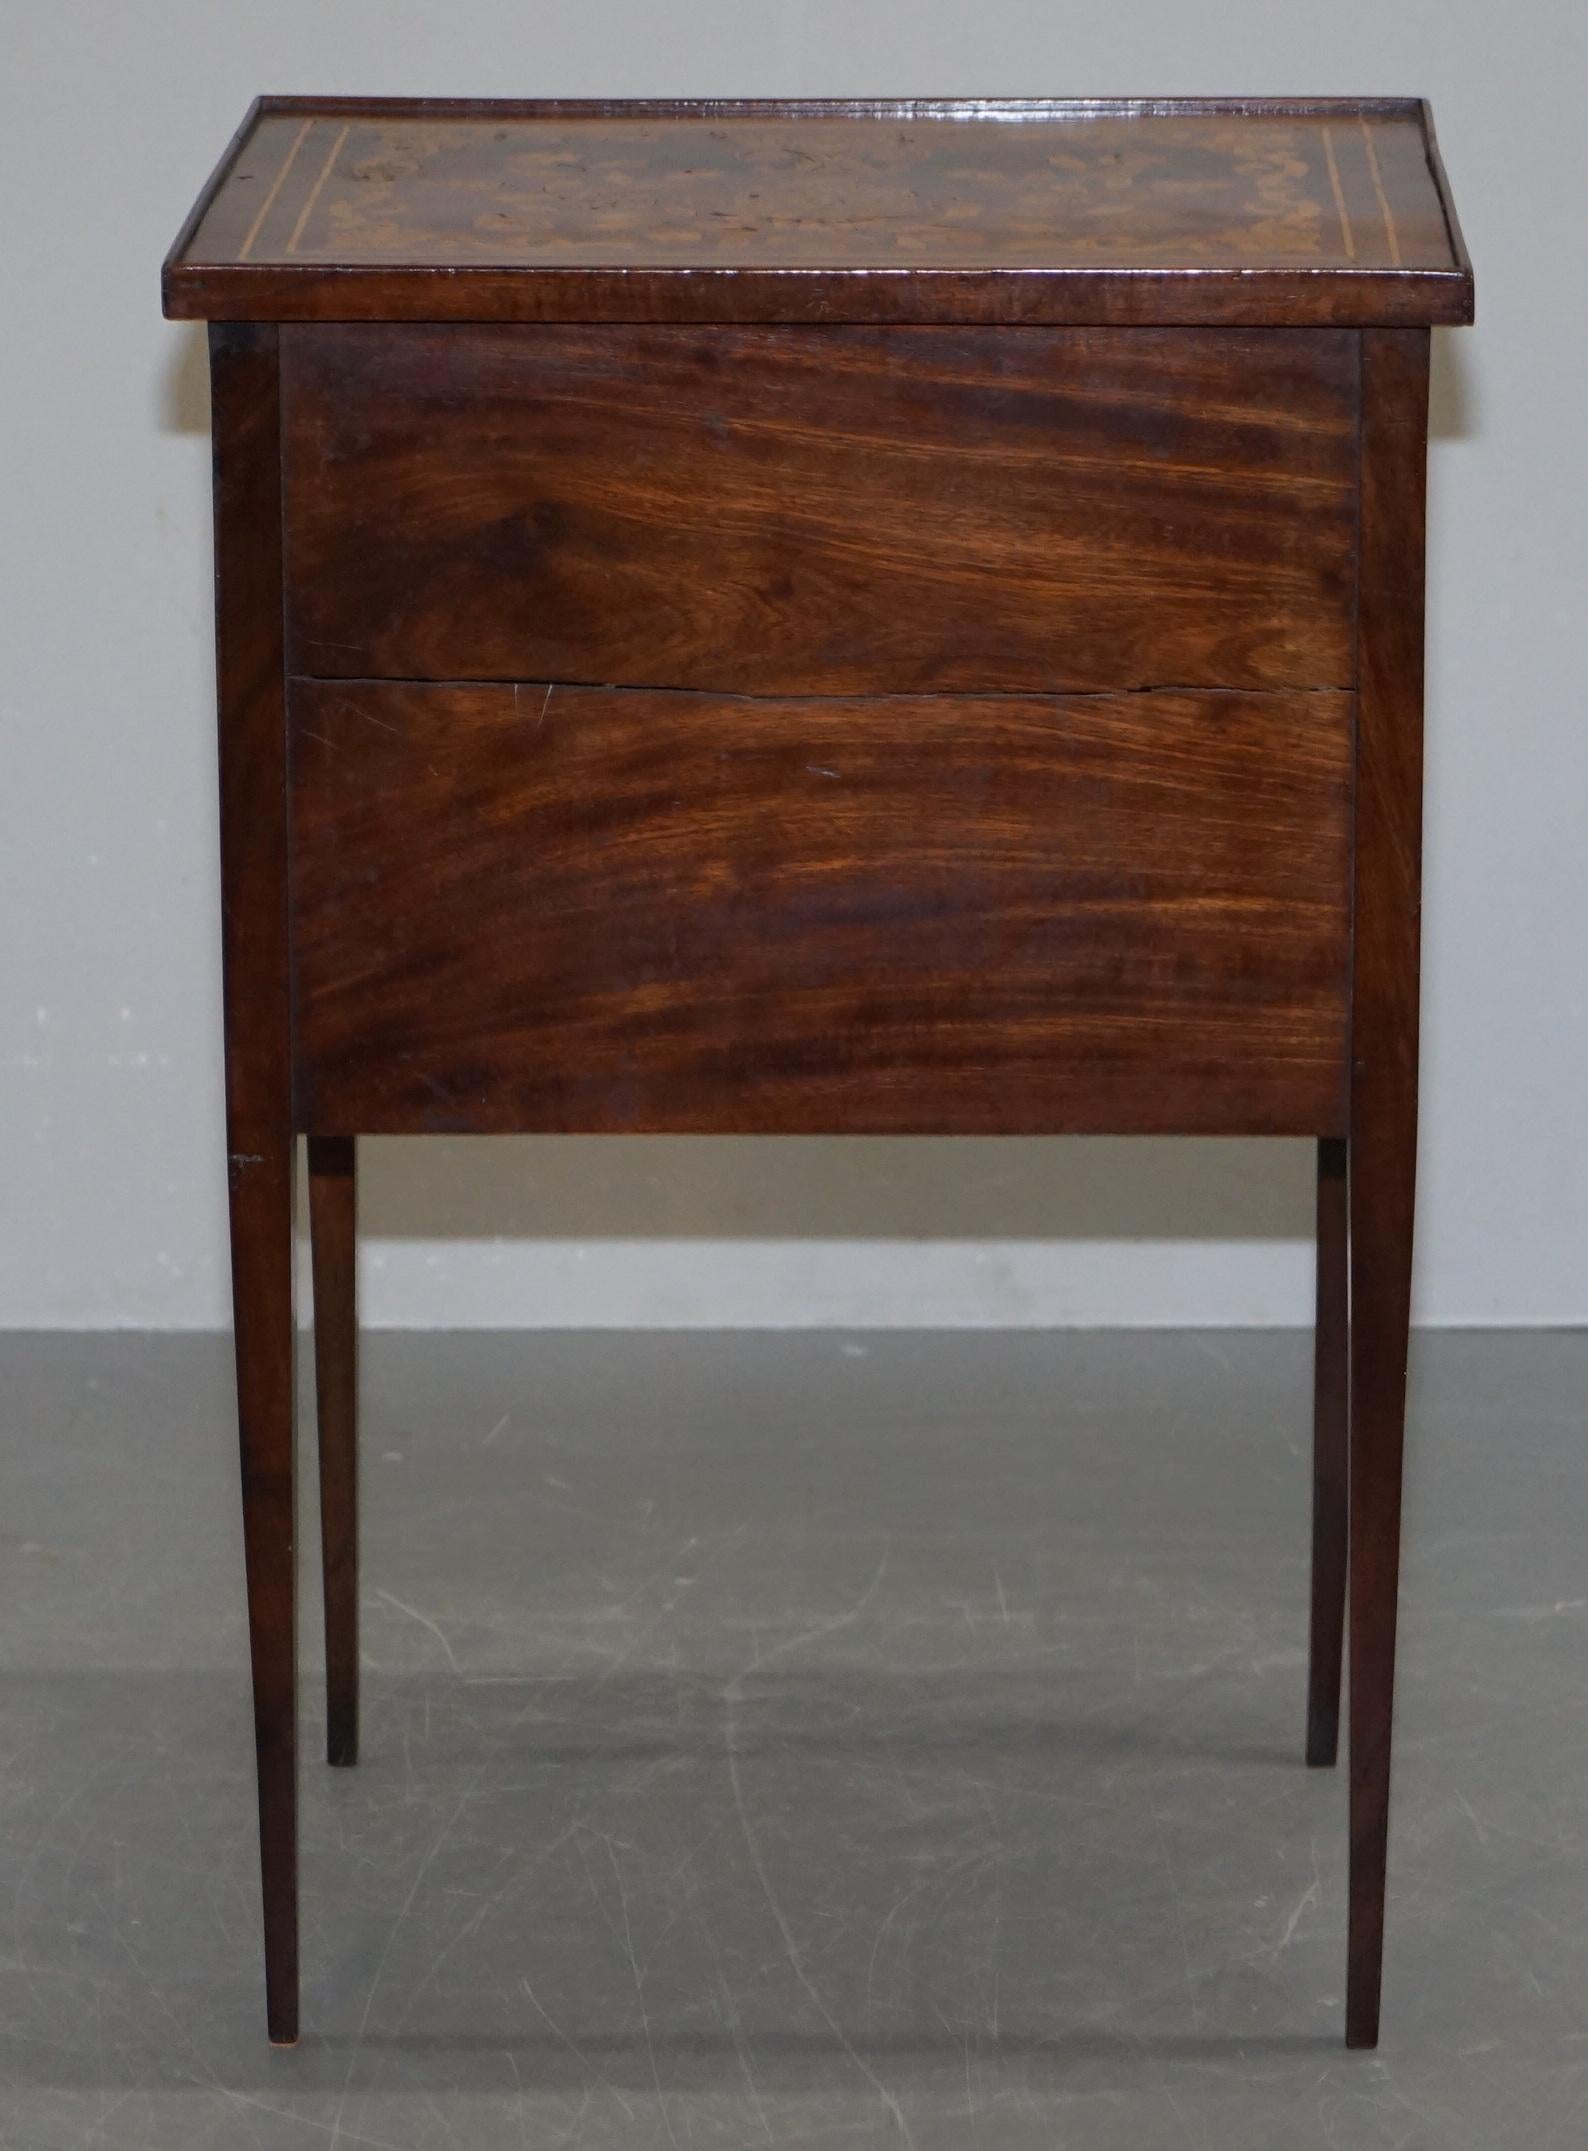 Rare 19th Century Dutch Marquetry Inlaid Side Table with Tambour Fronted Door For Sale 7